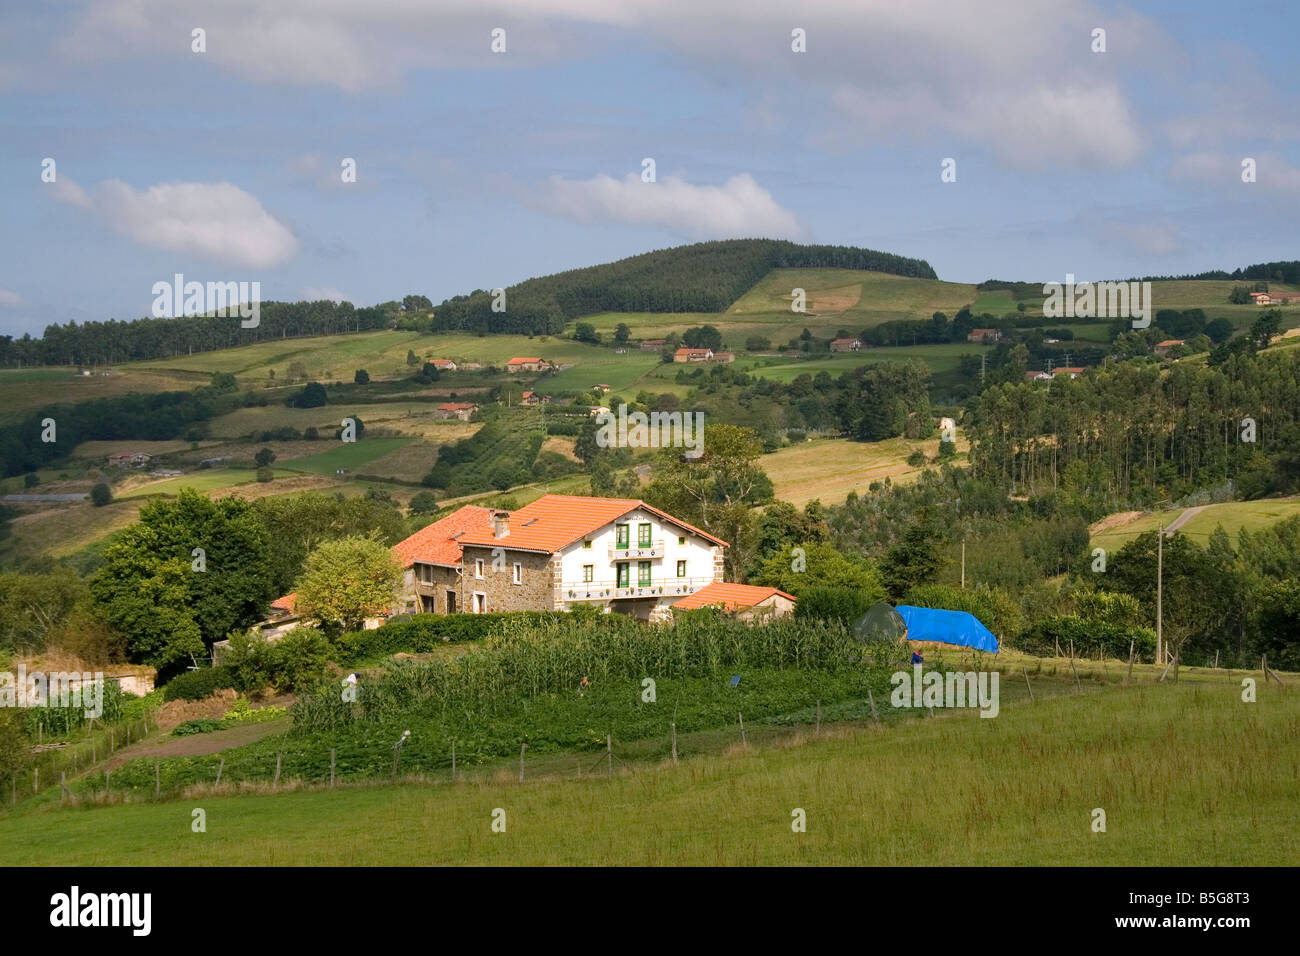 Rural farm near the town of Bermeo in the province of Biscay Basque Country Northern Spain Stock Photo